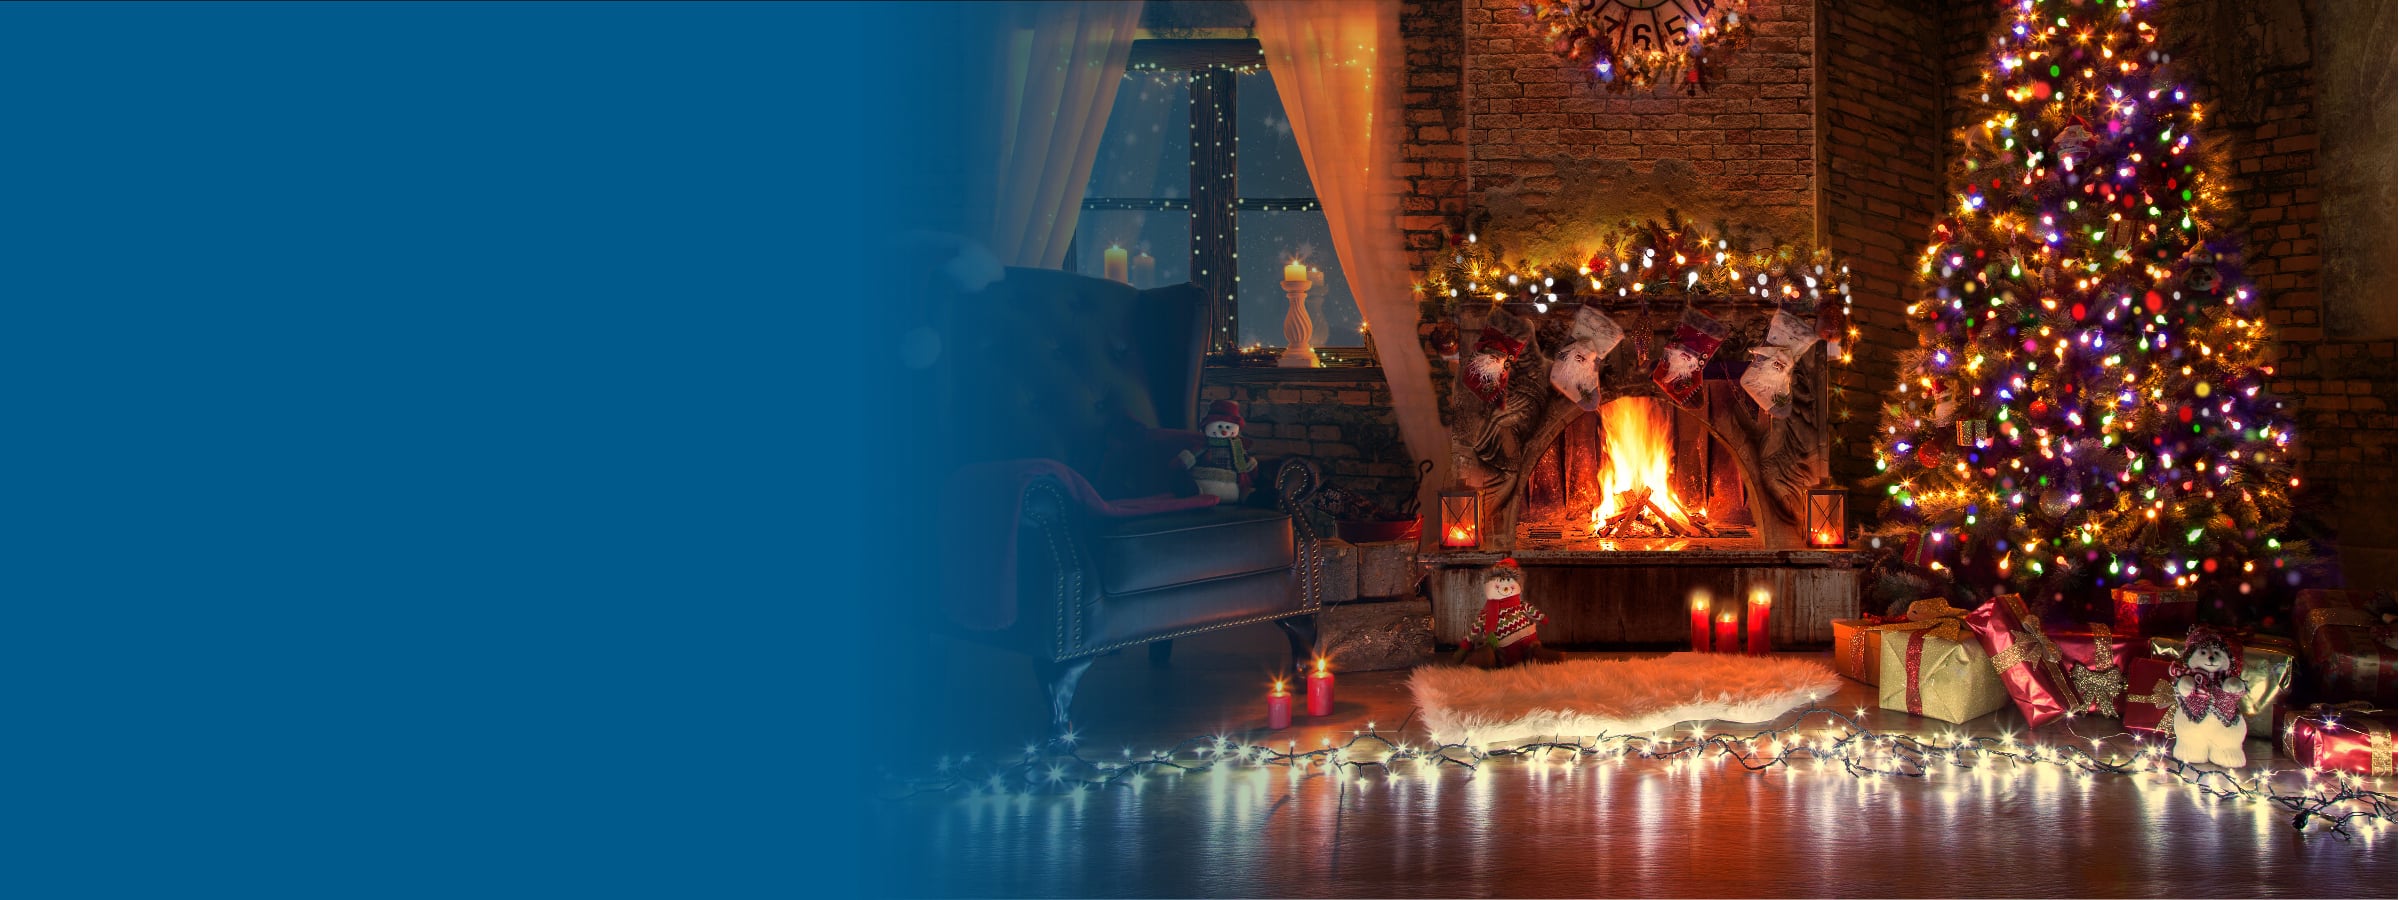 Keep the Yuletide Going – But Follow Fire Safety Tips